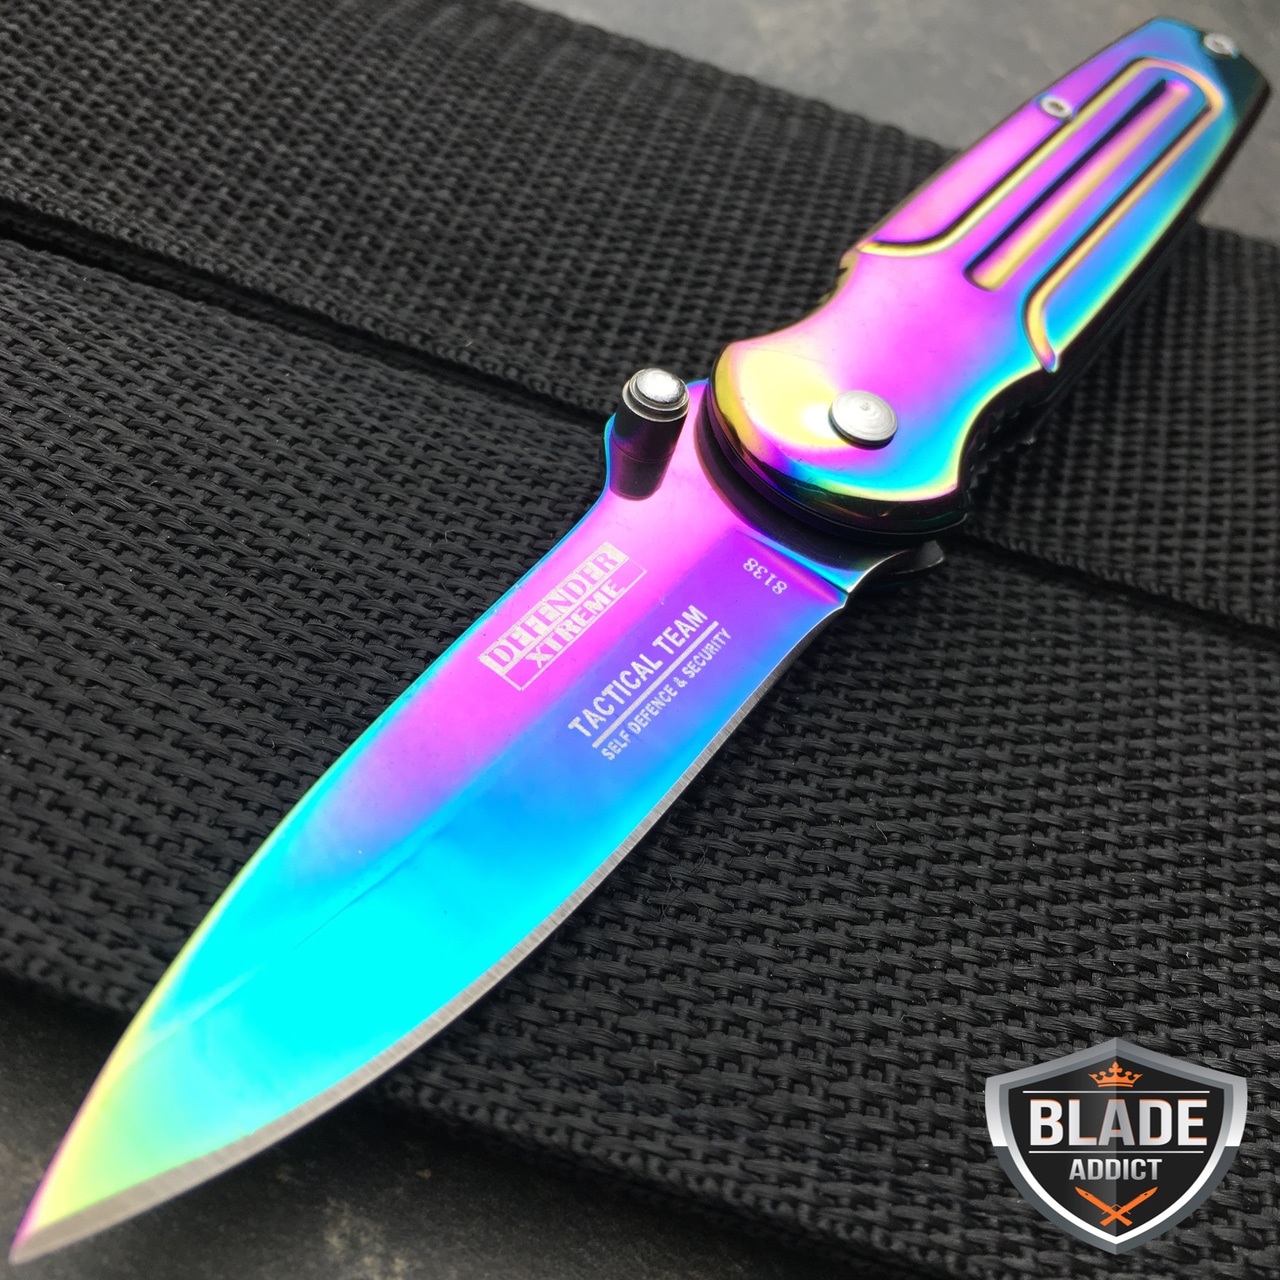 6.5" TITANIUM RAINBOW TACTICAL SPRING ASSISTED OPEN FOLDING POCKET